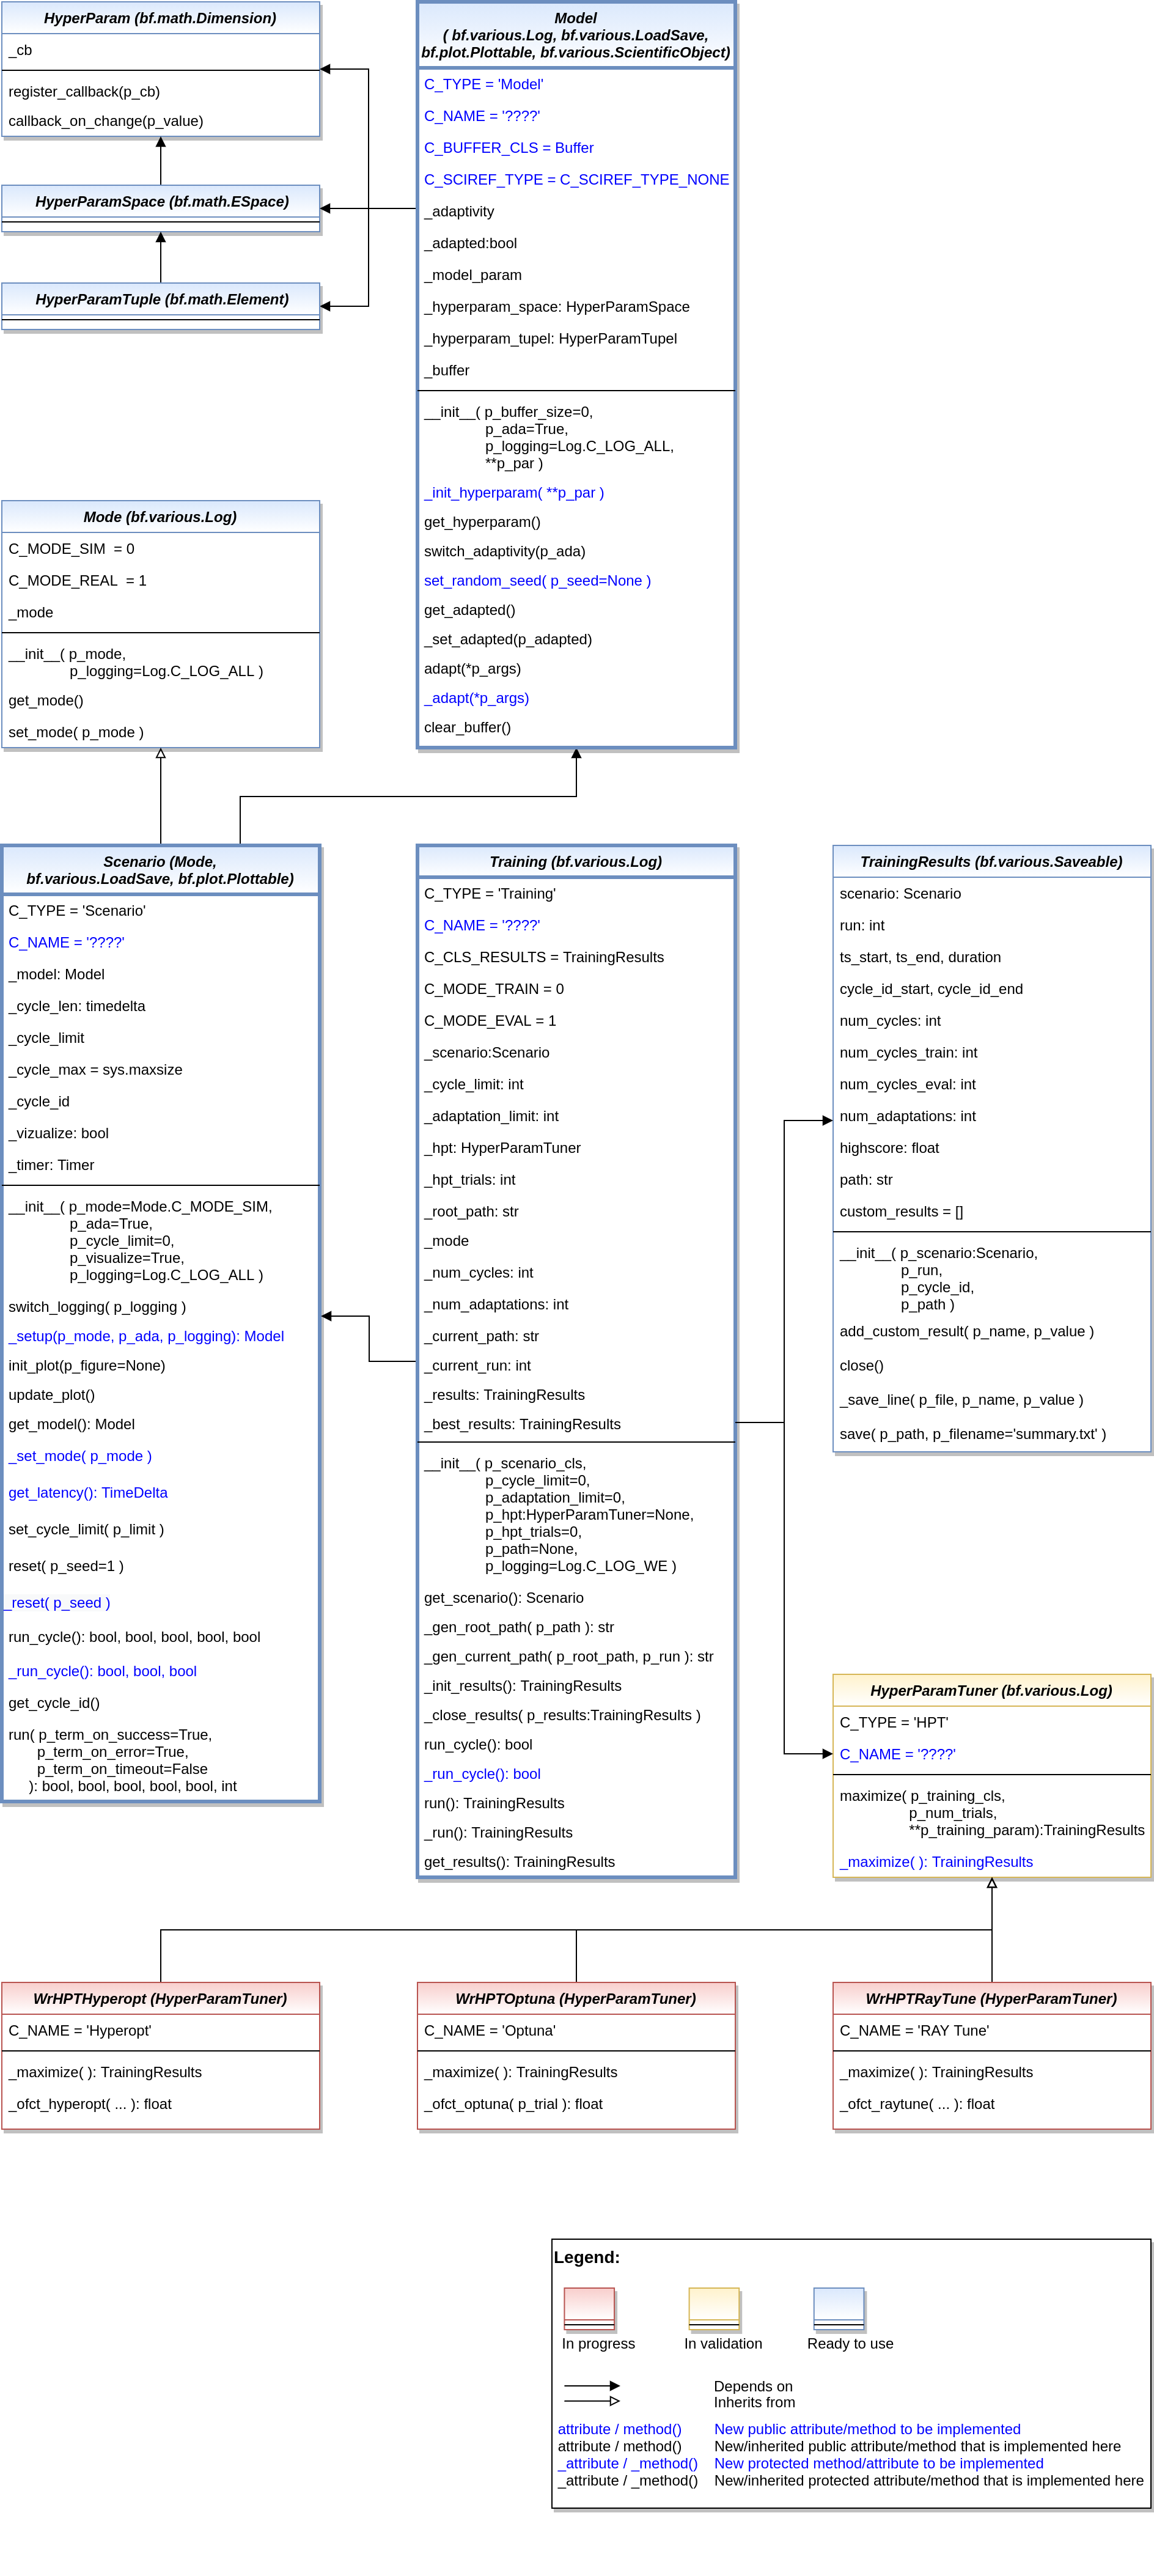 ../../../_images/MLPro-BF-ML_class_diagram.png